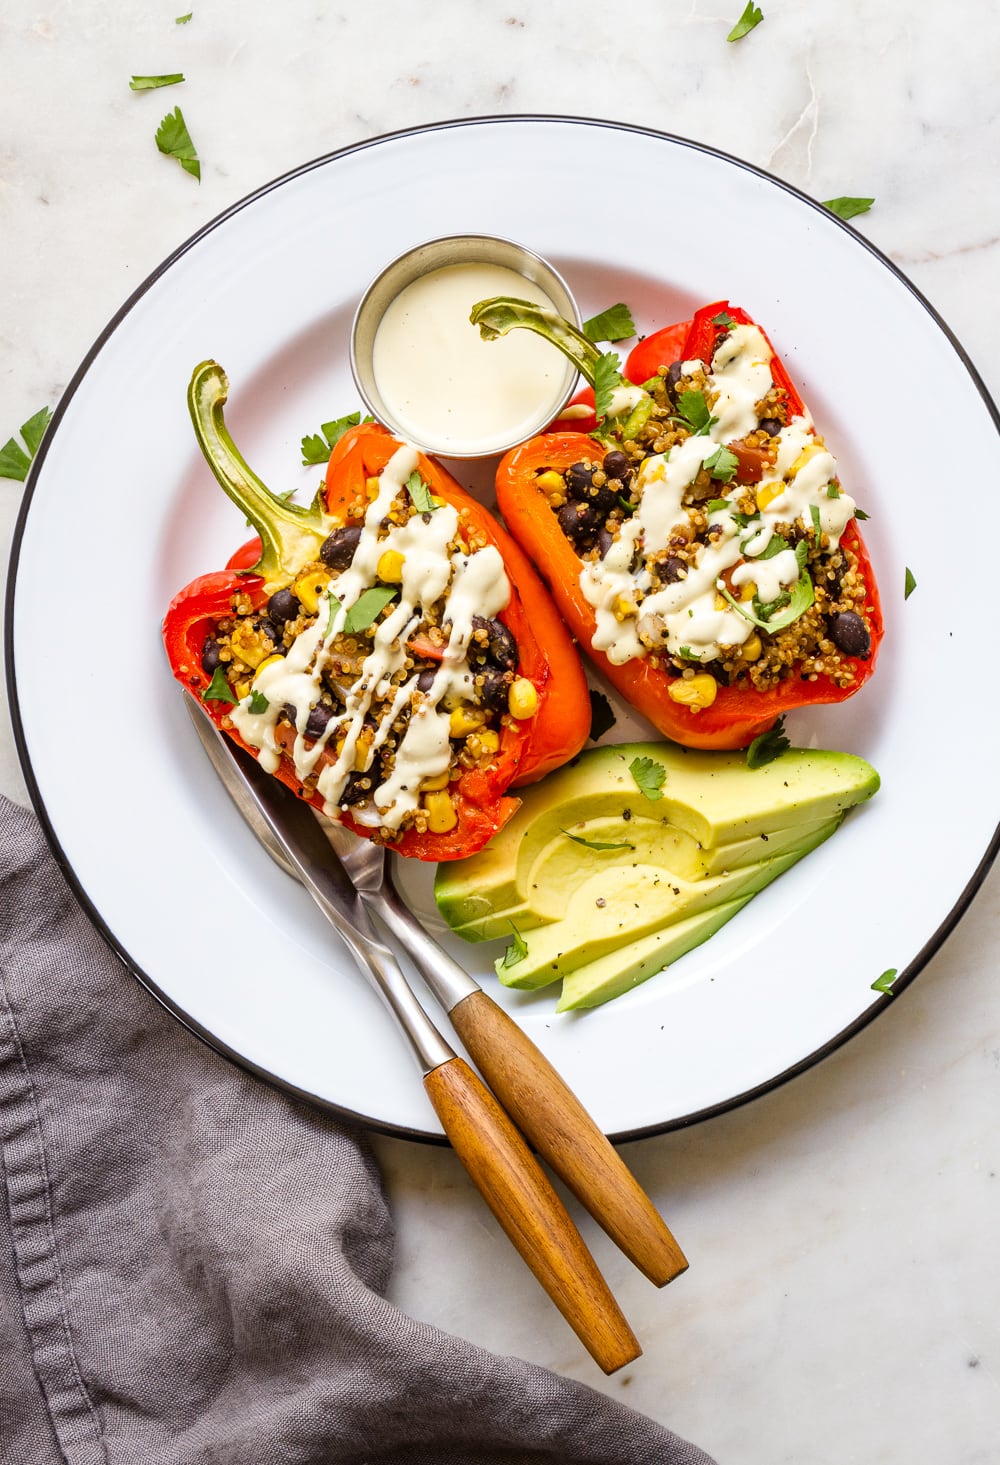 top down view of 2 halves of roasted bell pepper stuffed with tex-mex quinoa and avocado on the side on a white plate with black rim and fork and knife.